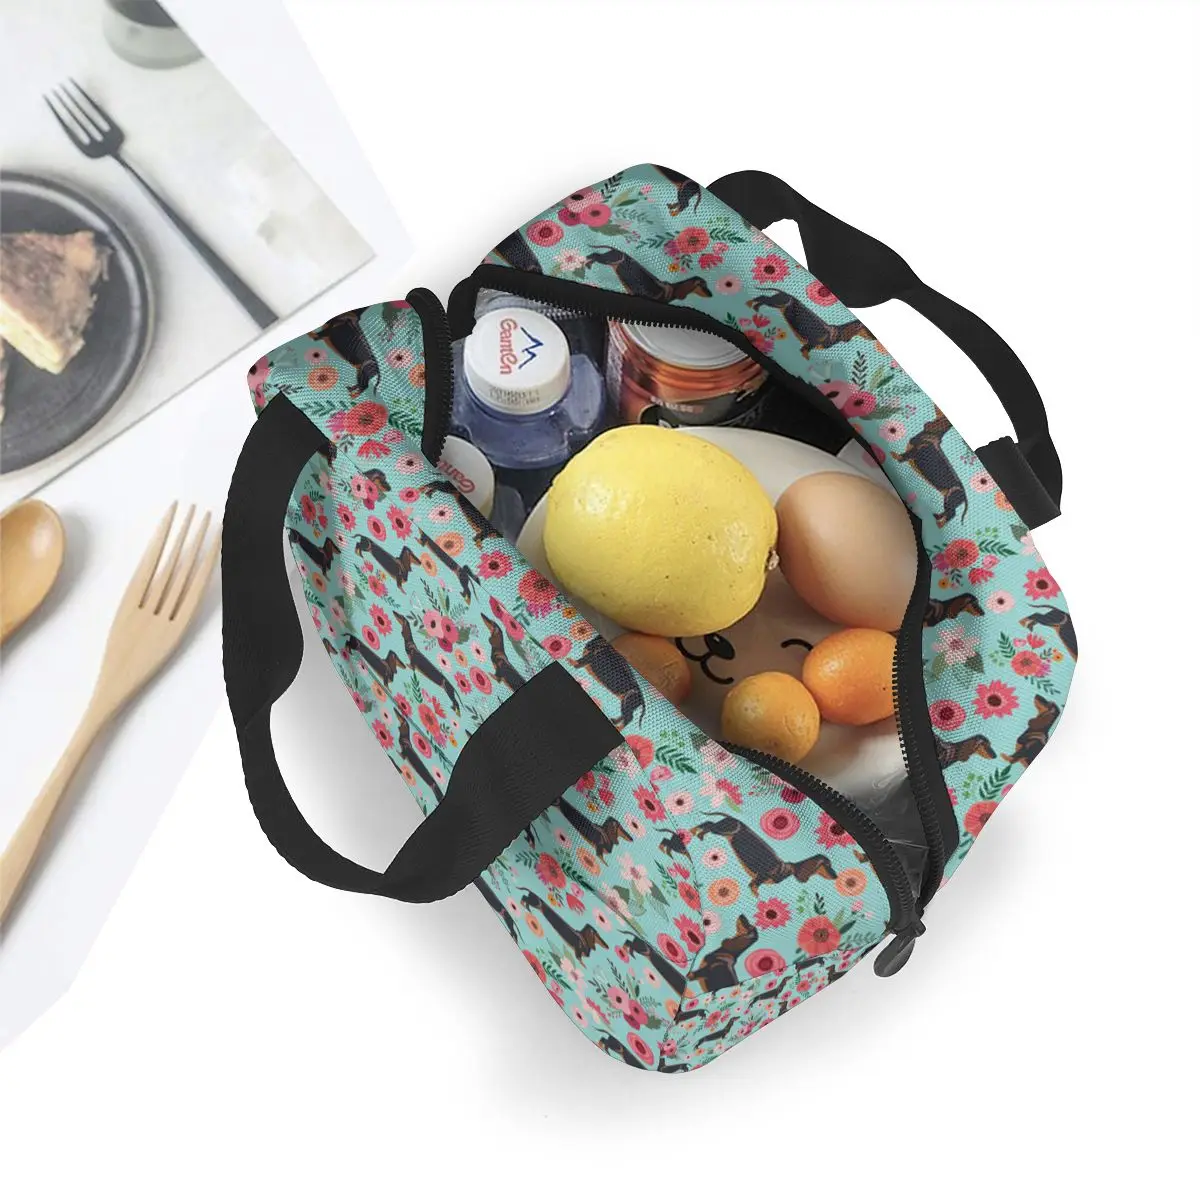 

NOISYDESIGNS Cartoon Dachshund Print Portable Lunch Bag Thermal Insulated Tote Picnic Food Cooler Bag Lunch Storage Pouch Case